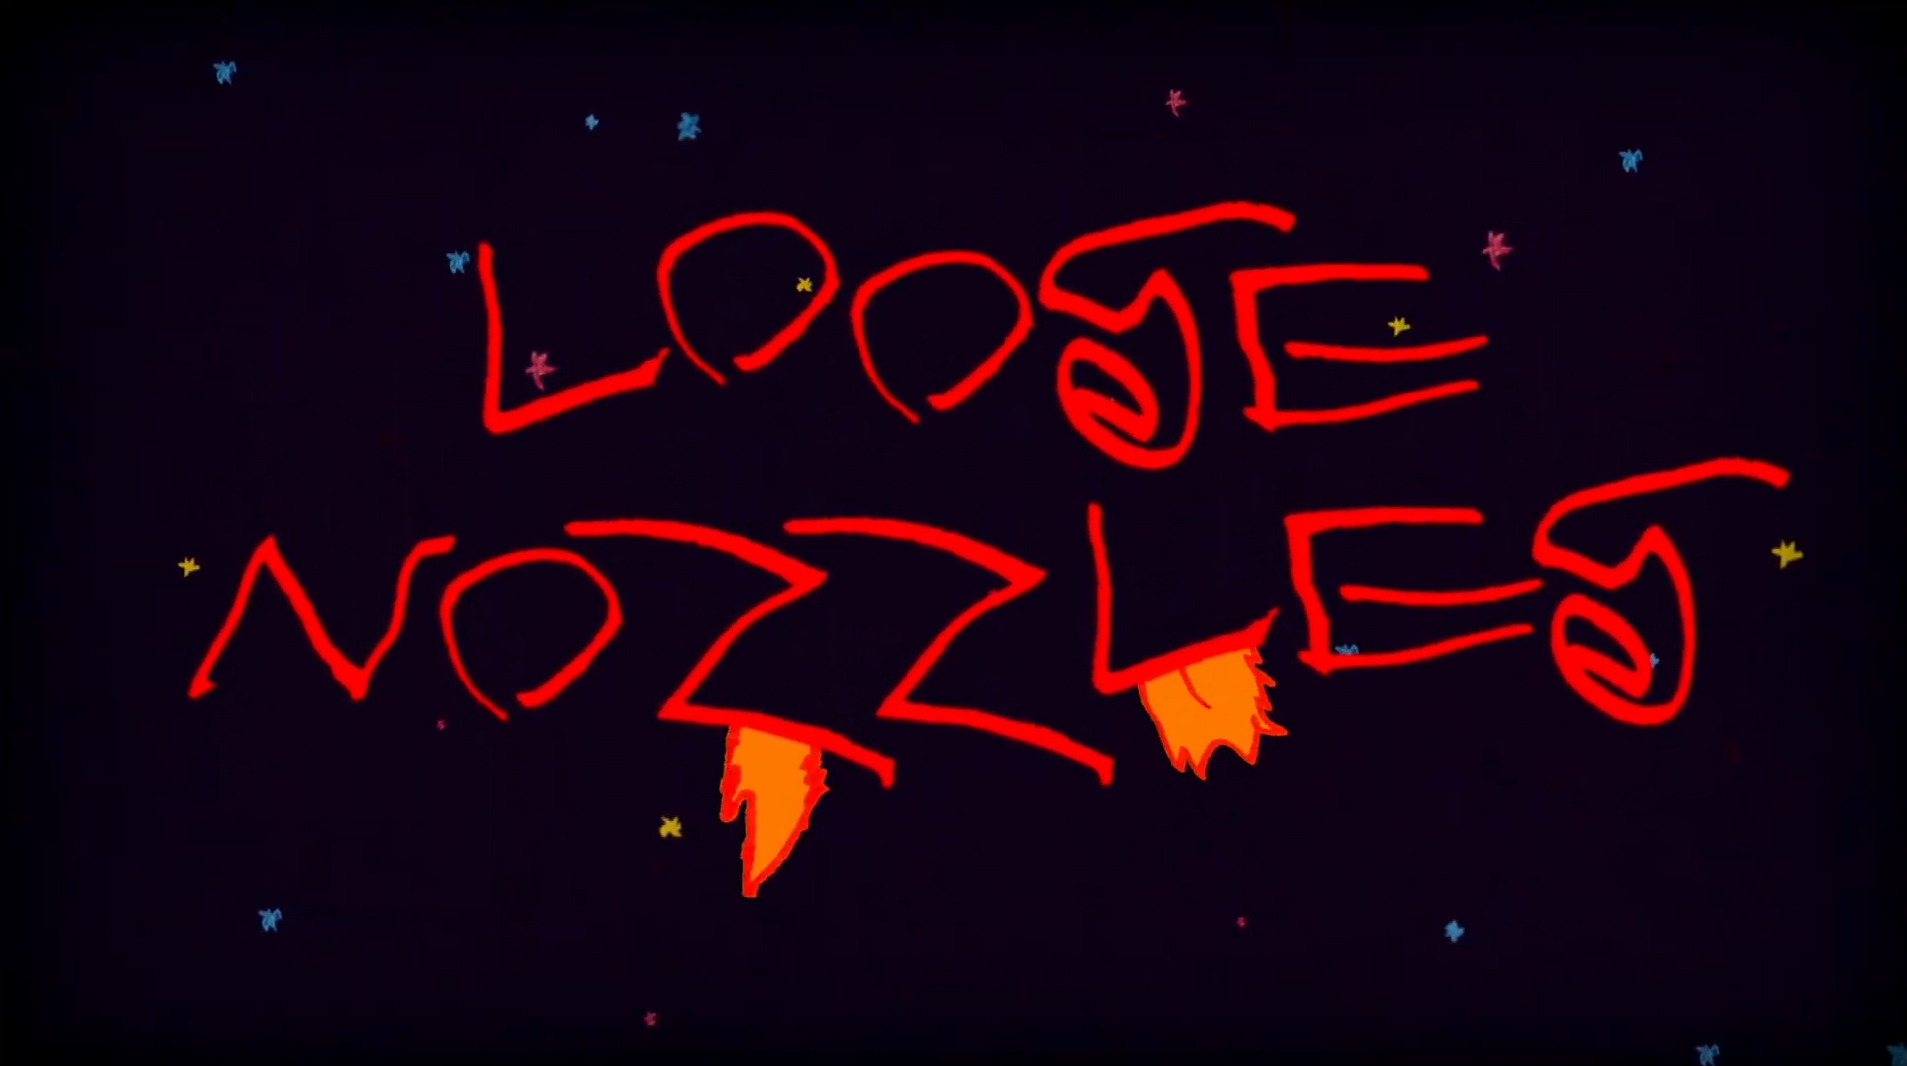 Loose nozzles cover